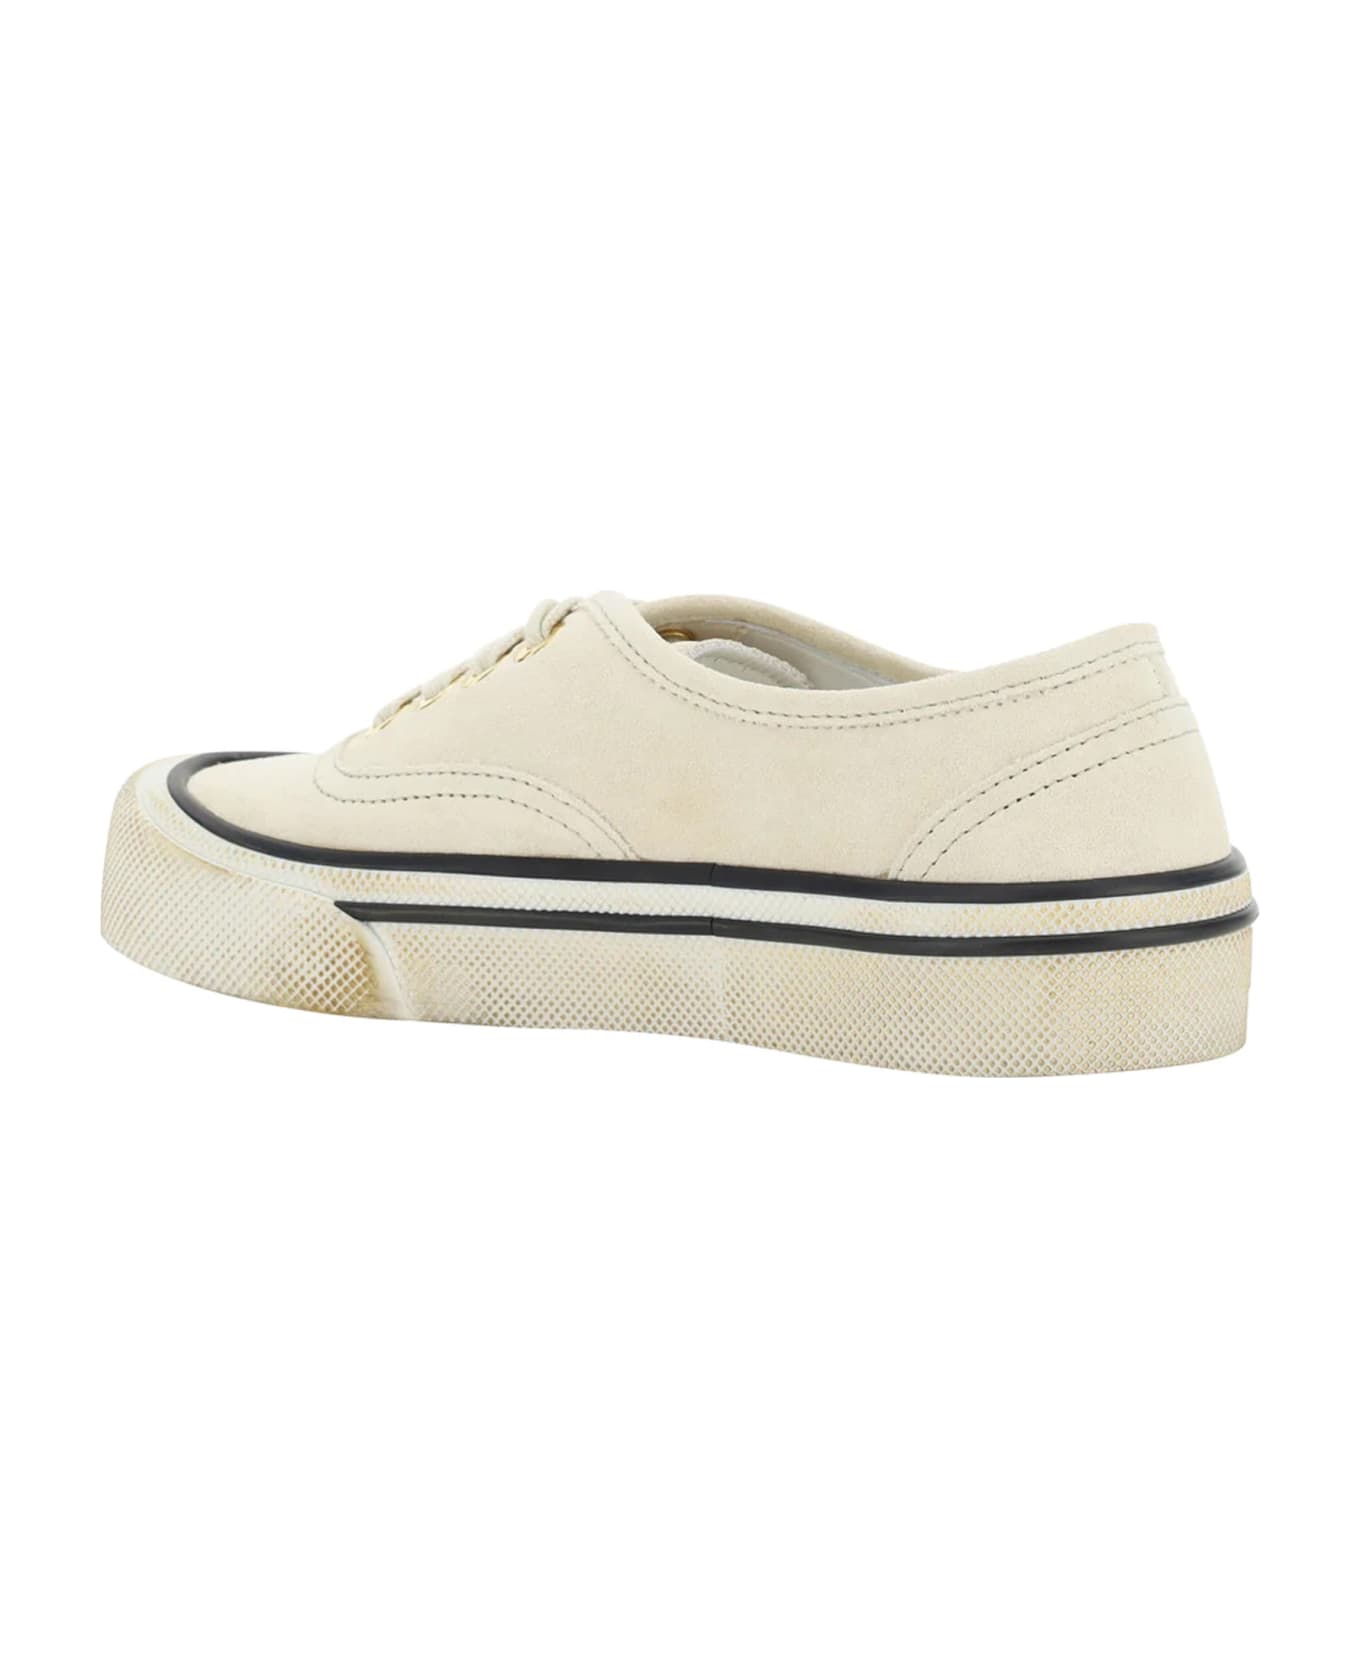 Bally Lyder Leather Sneakers - White スニーカー